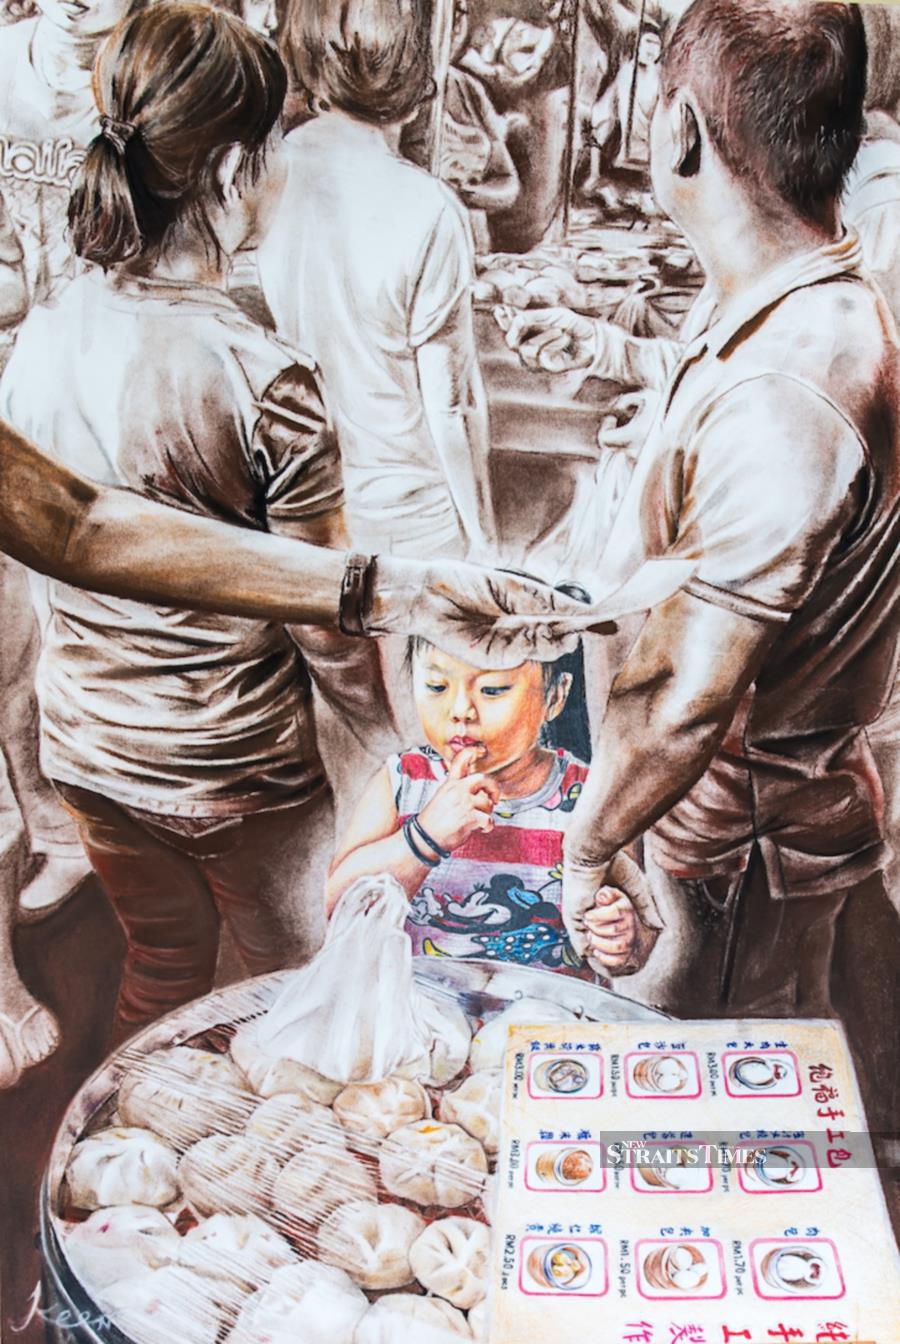  Winning piece from Ng Sin Koon of ATEC Academy in the Mixed Media category with her artwork So Delicious! which utilises coloured pencil and soft pastel.